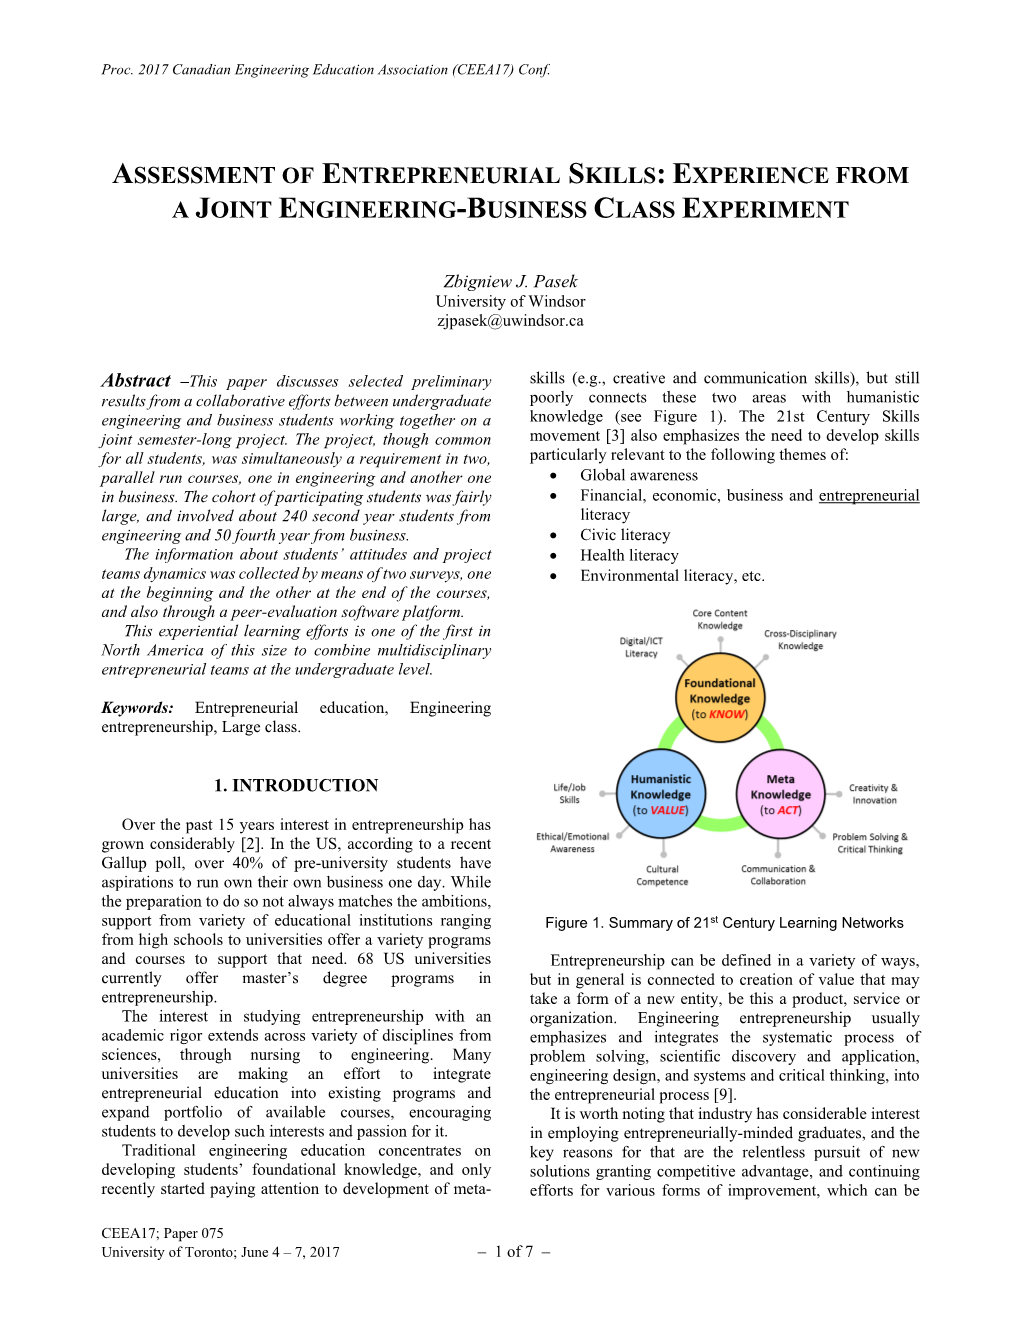 Assessment of Entrepreneurial Skills: Experience from a Joint Engineering-Business Class Experiment